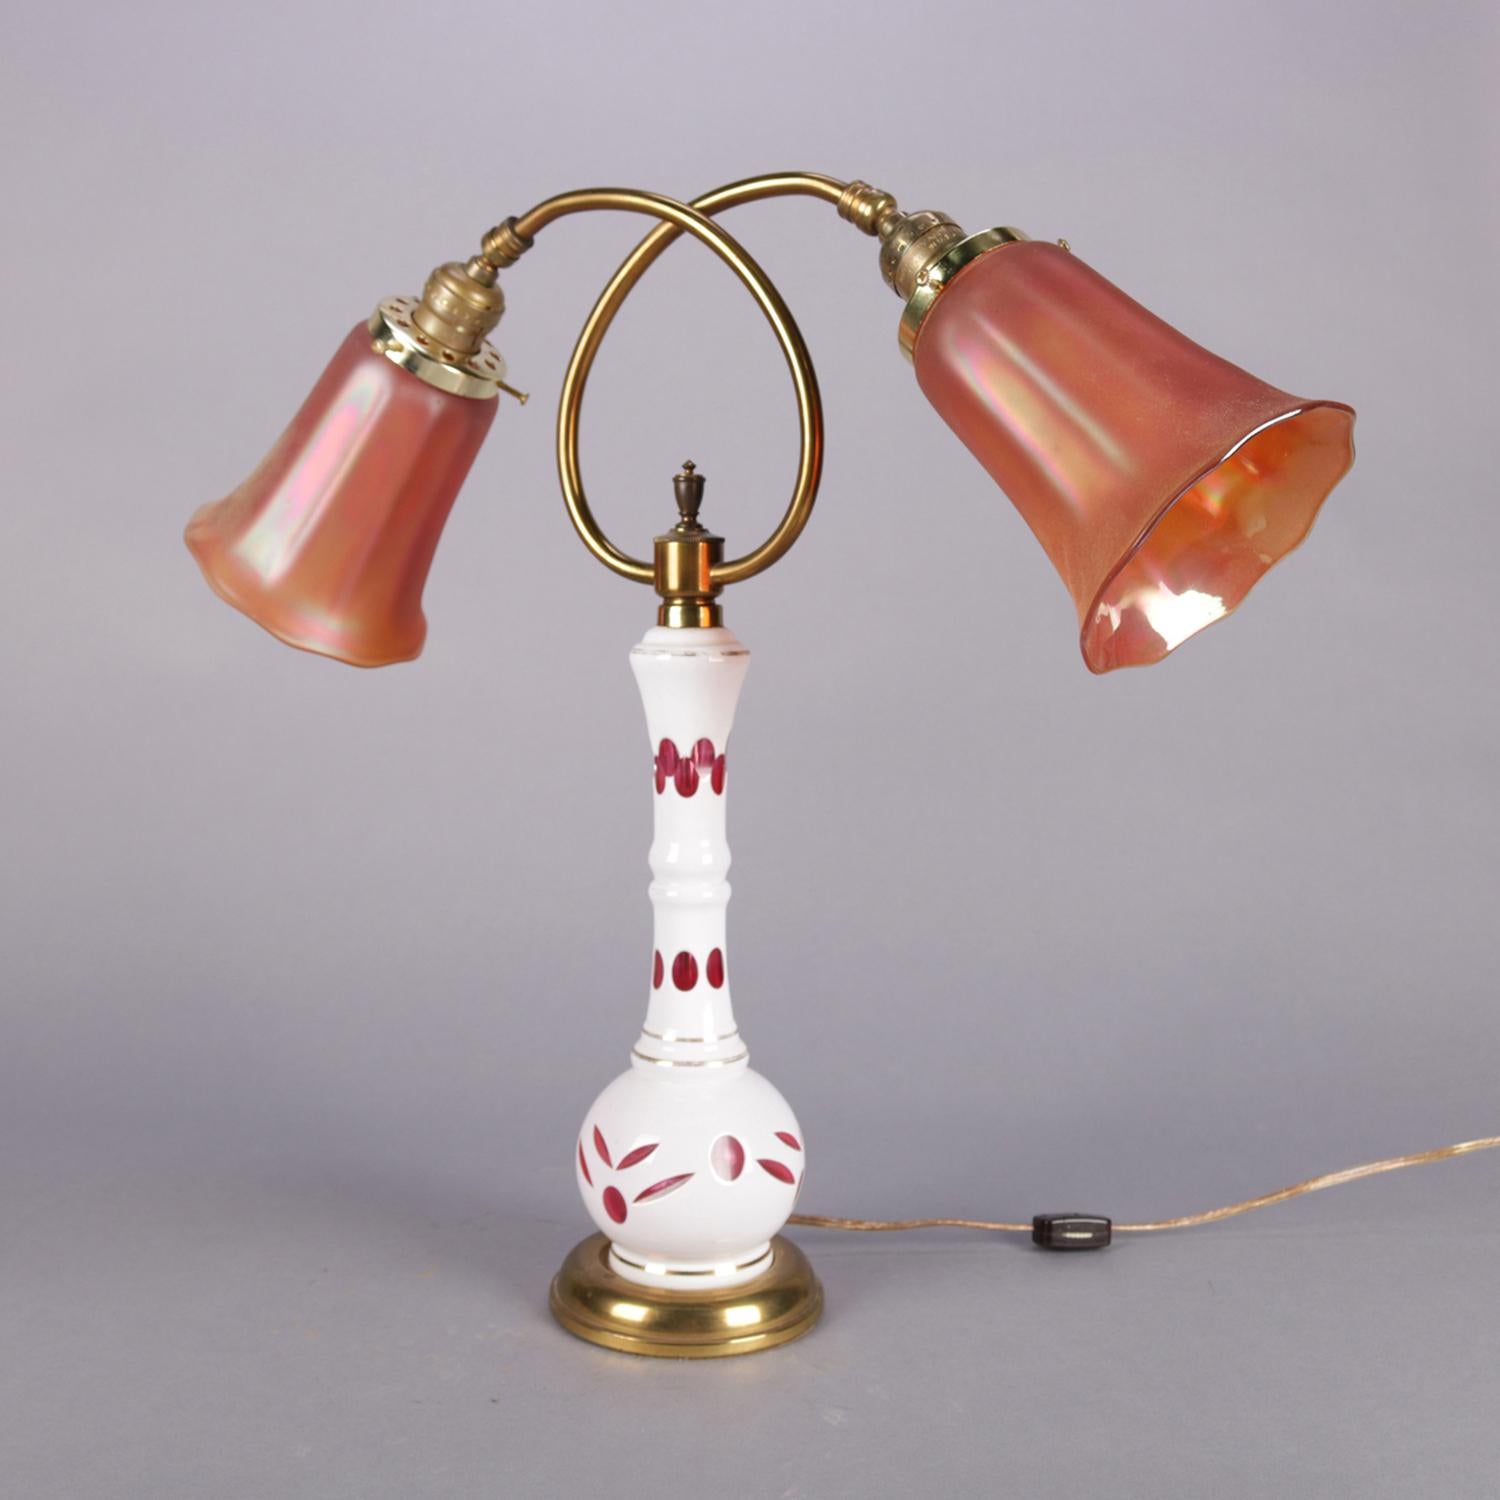 Antique Bohemian glass table lamp features cased cut to cranberry vase with stylized floral motif seated on brass base and having two scrolled arms terminating in lights with carnival glass faceted shades, professionally re-wired, circa